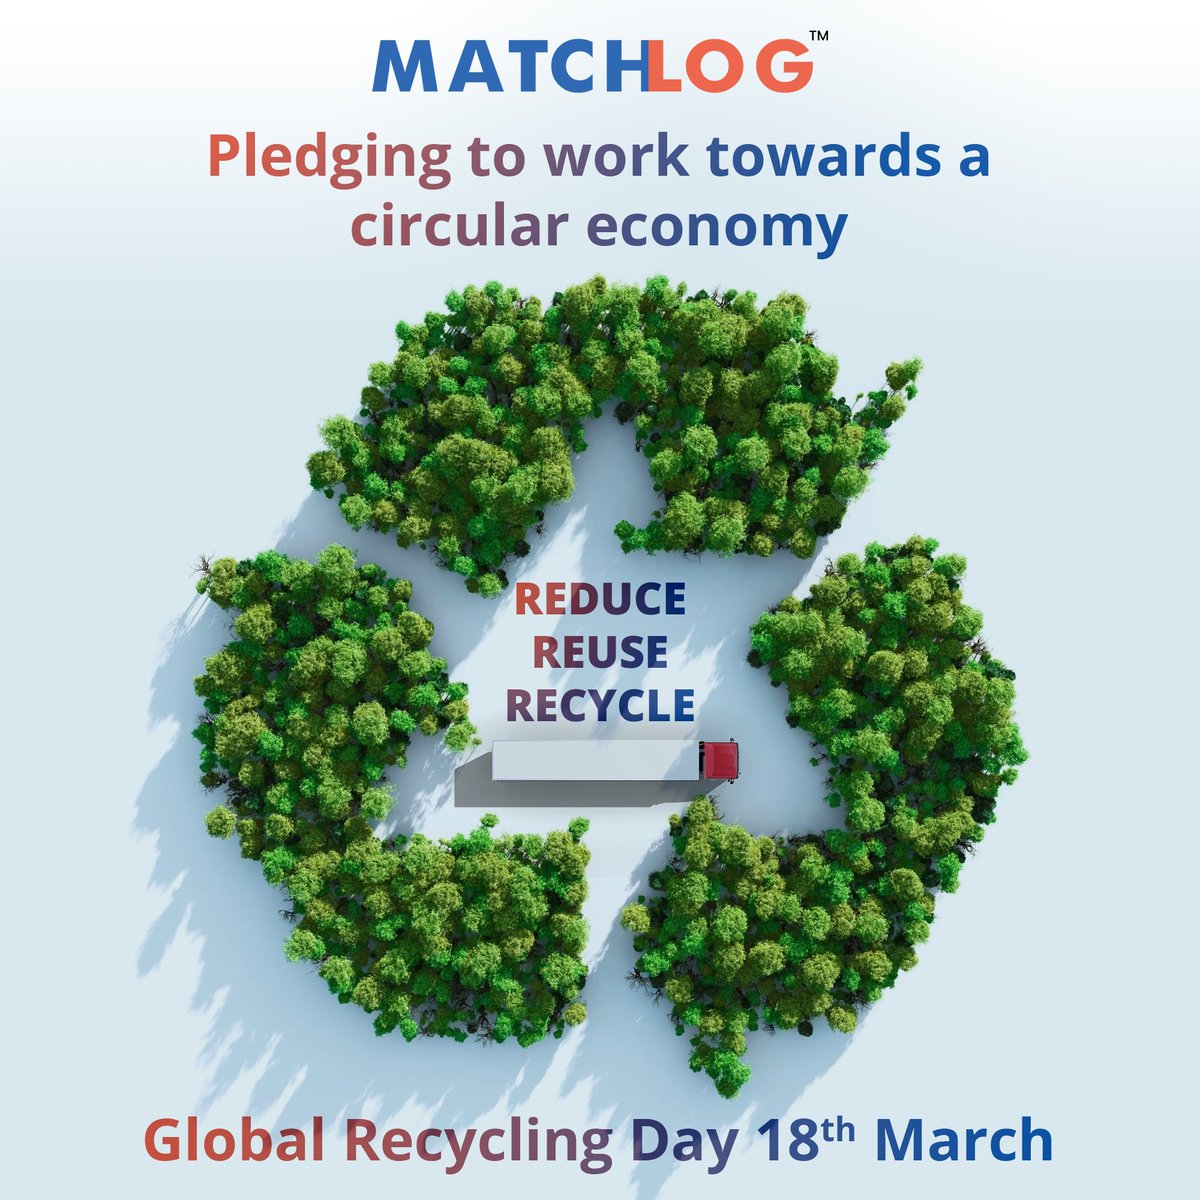 Happy Global Recycling Day!  

From upcycling old materials into something new to using technology to improve recycling processes, innovative ideas are driving the sustainability revolution. 

#GlobalRecyclingDay #CreativeInnovation #Sustainability #MatchLog